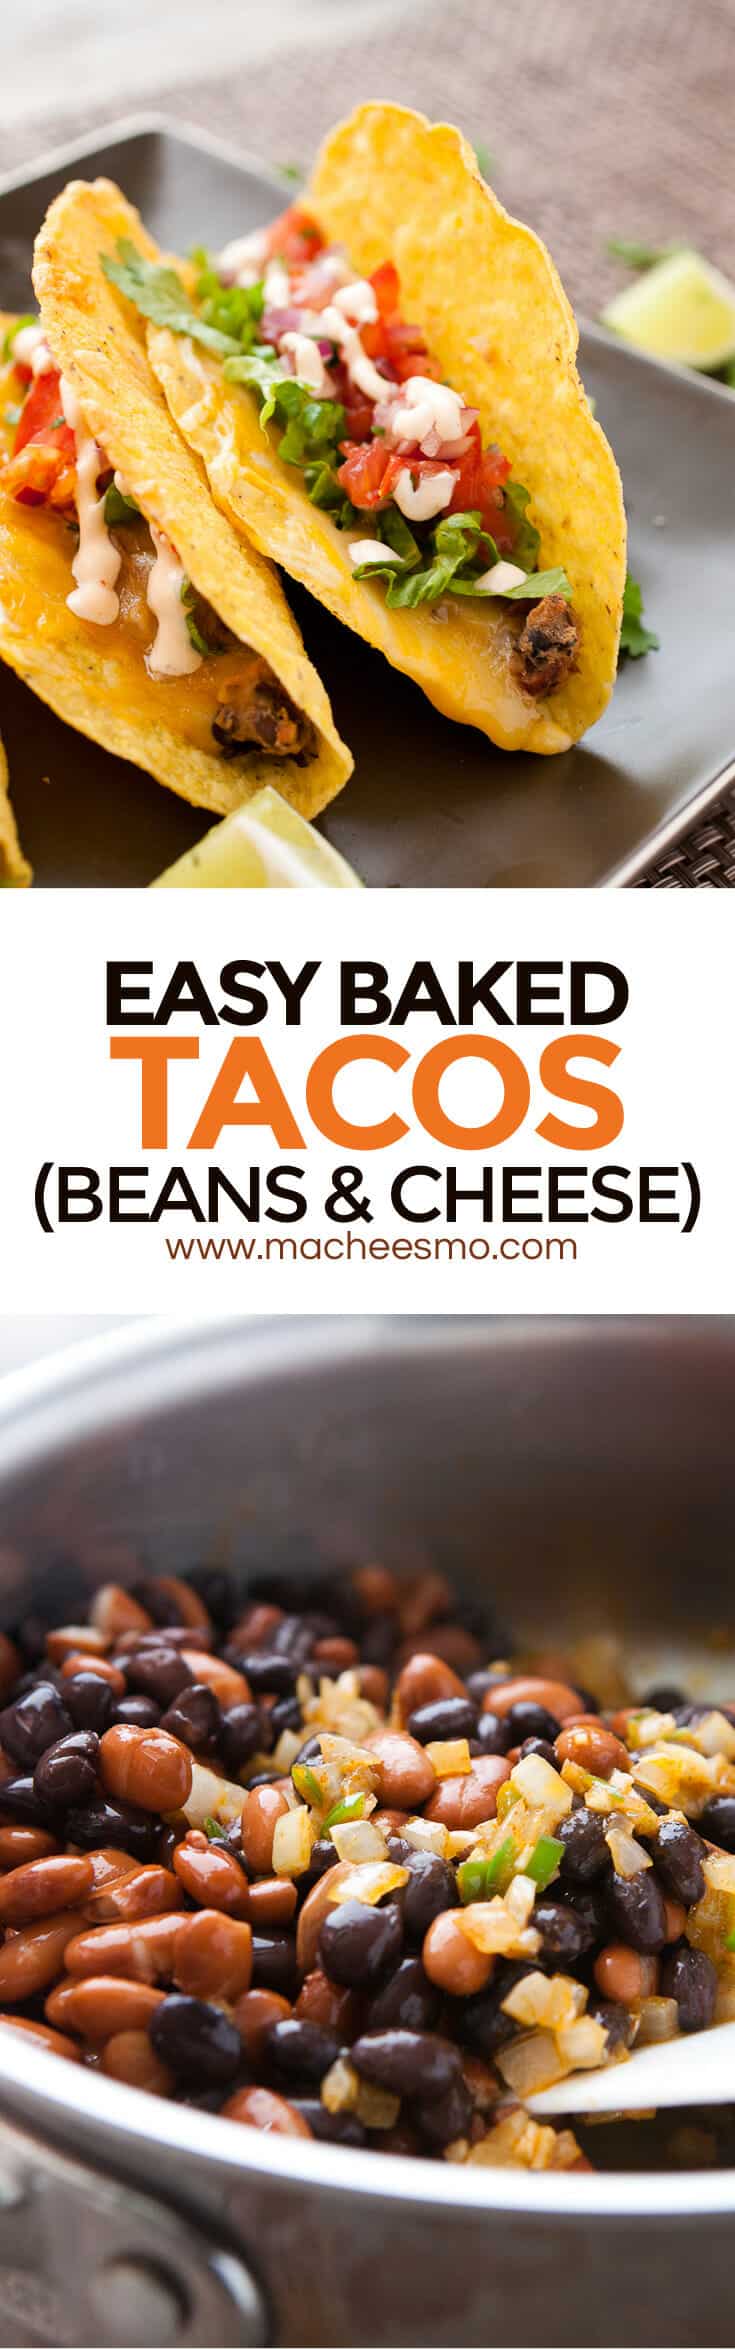 Easy Bean and Cheese Baked Tacos: Baking your tacos ensure the cheese gets super-melty and the filling stays hot! I like to make my own mashed bean mixture for these tacos and top them with a quick pico de gallo and sour cream sauce! Read the post for my THREE TACO TIPS for success! | macheesmo.com